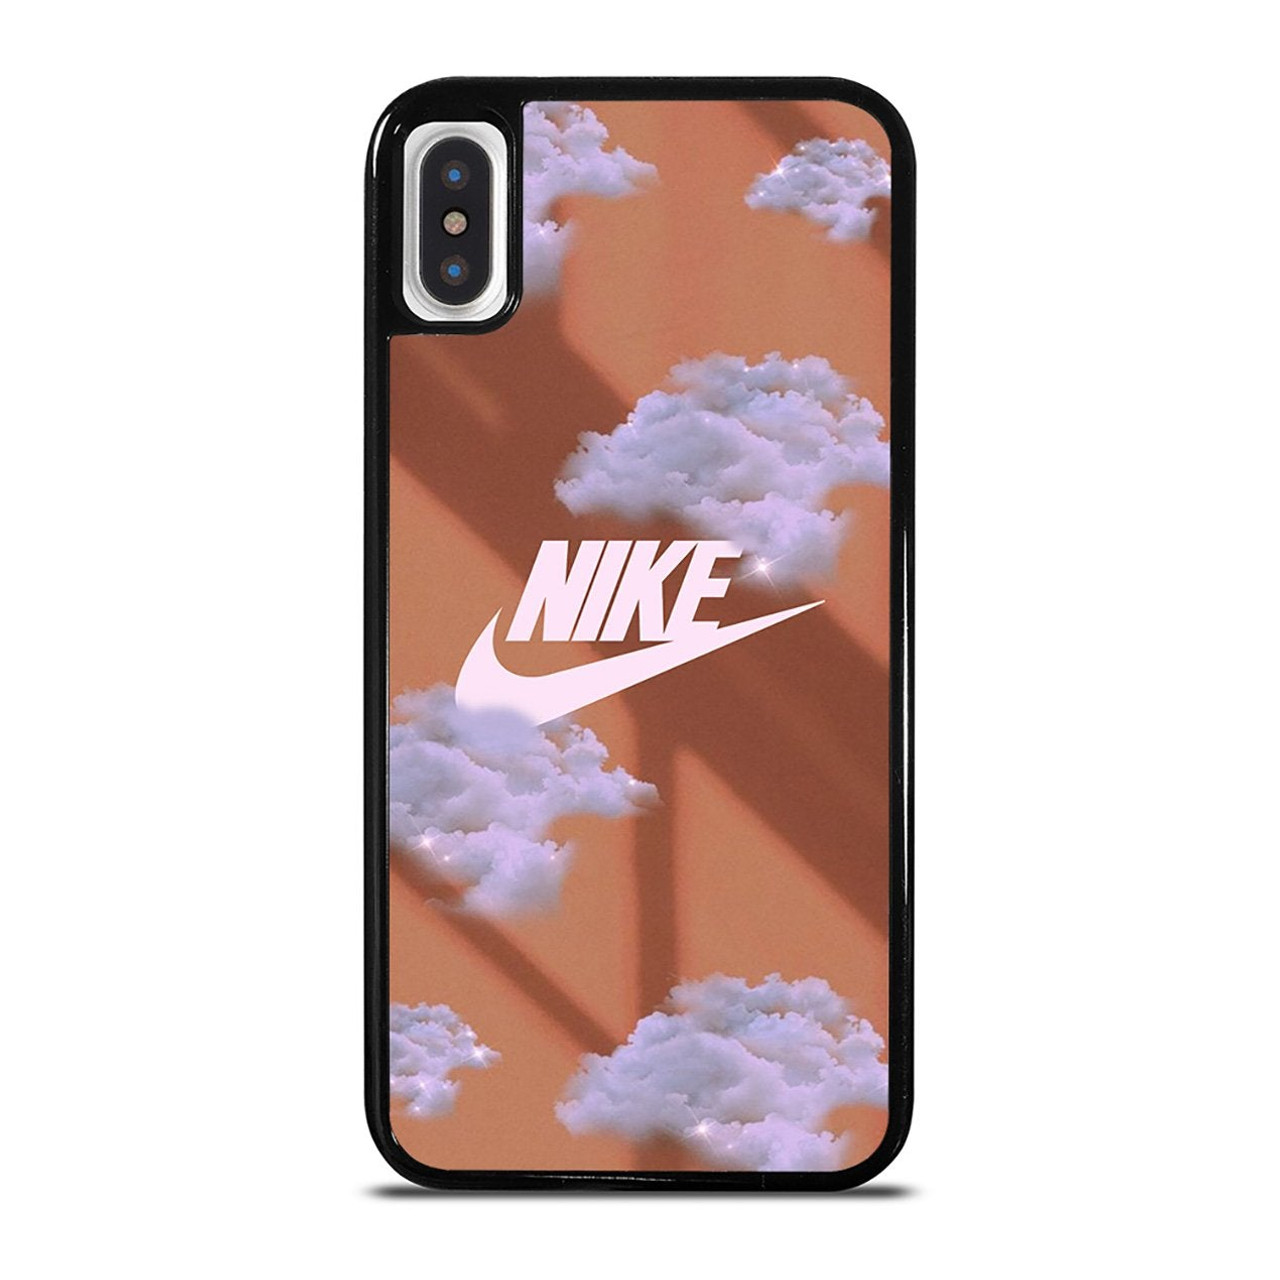 NIKE AESTHETIC CLOUD iPhone X / XS Case Cover